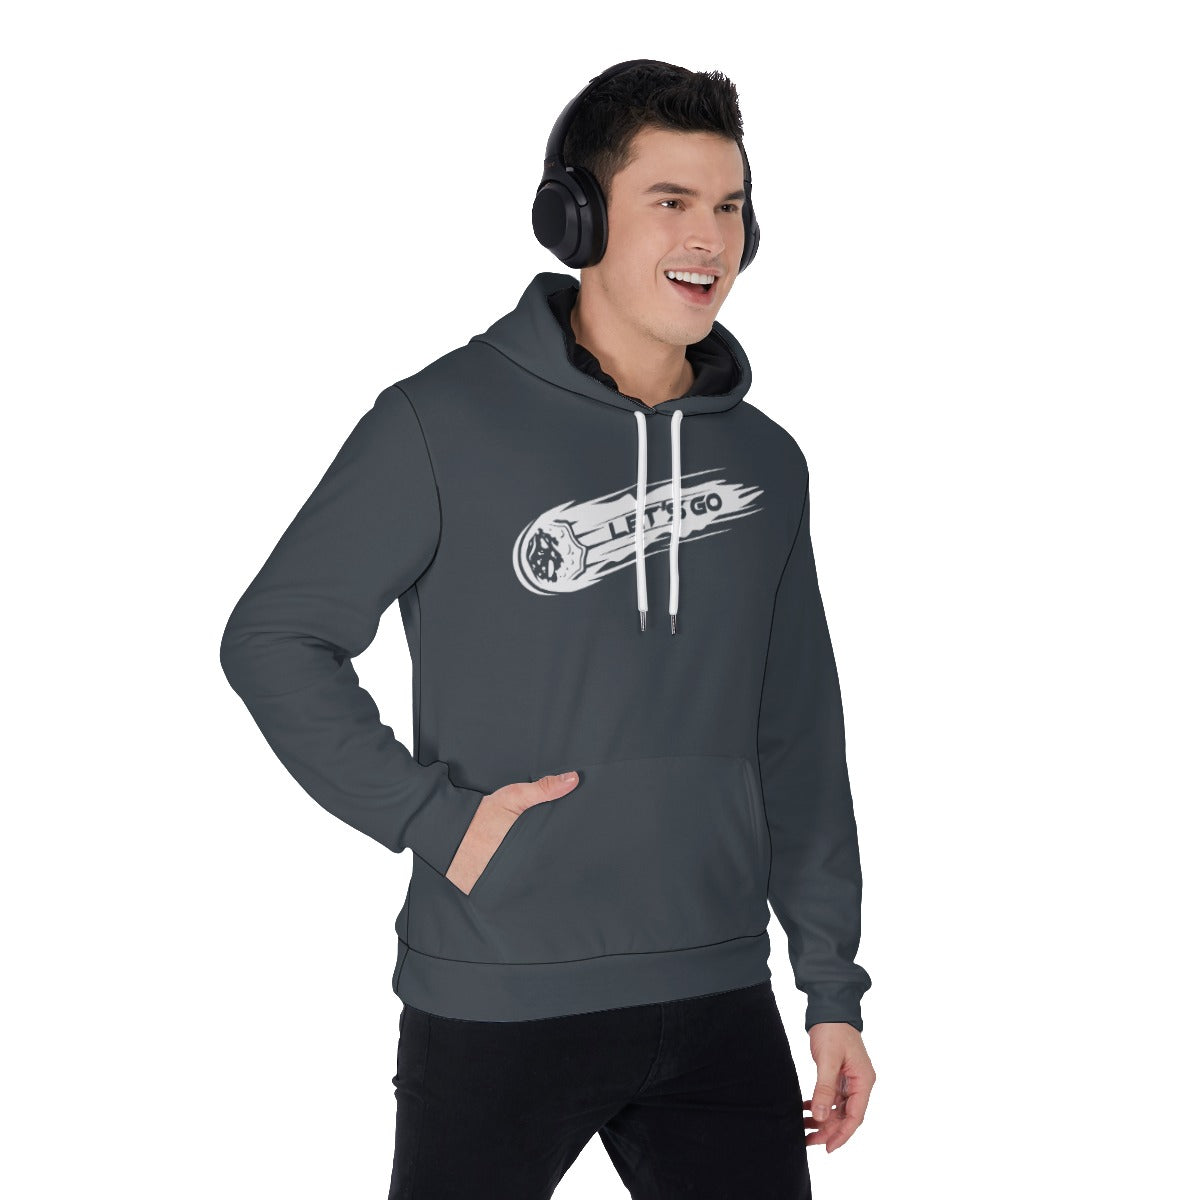 Adult Tbodin Gaming Pullover Hoodie